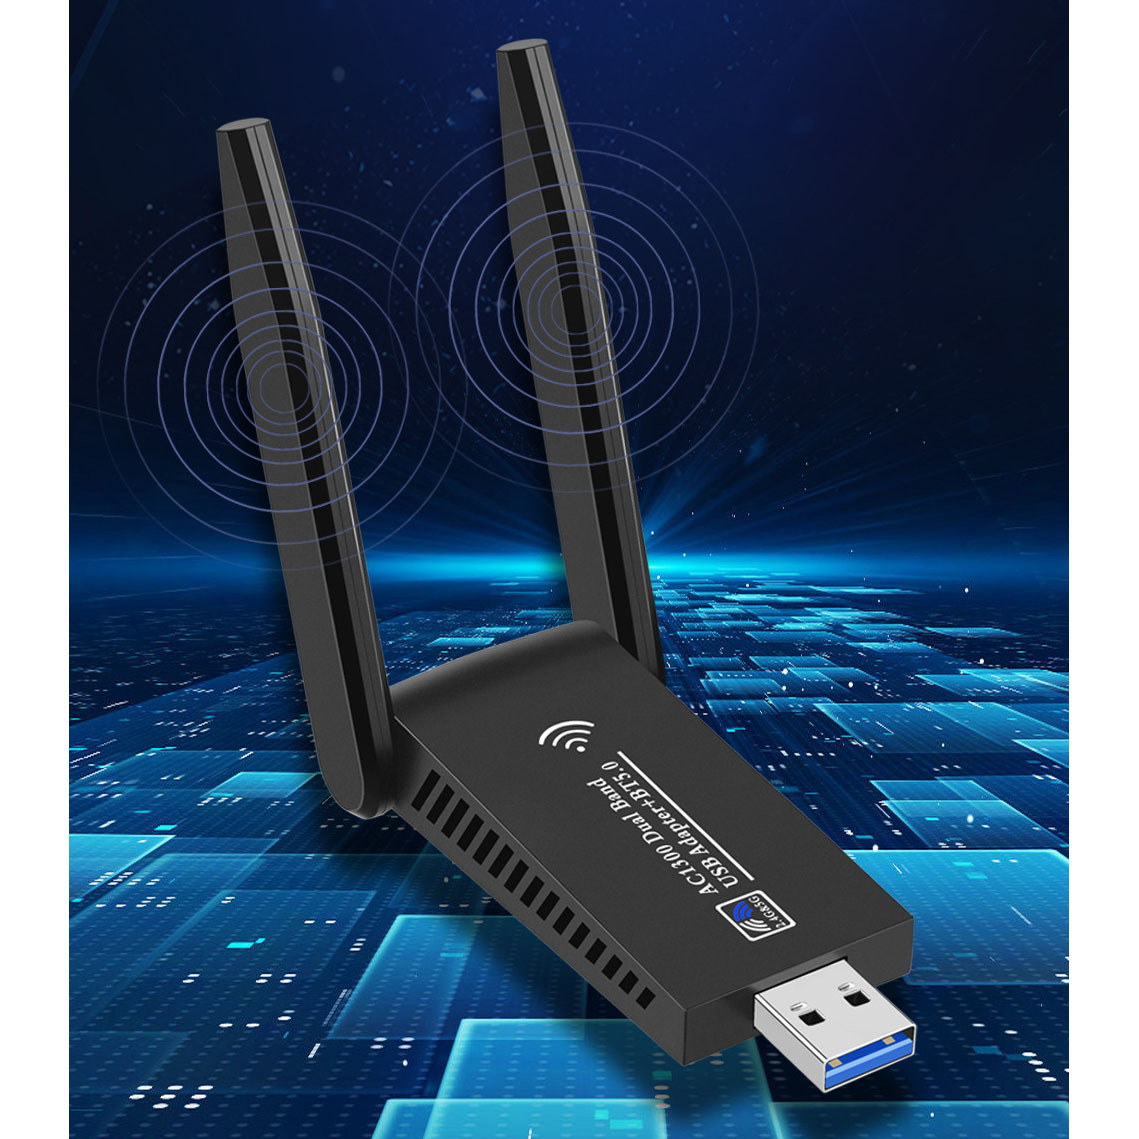 WiFi Adapter for PC, 1200Mbps USB 3.0 Wireless Network WiFi Dongle